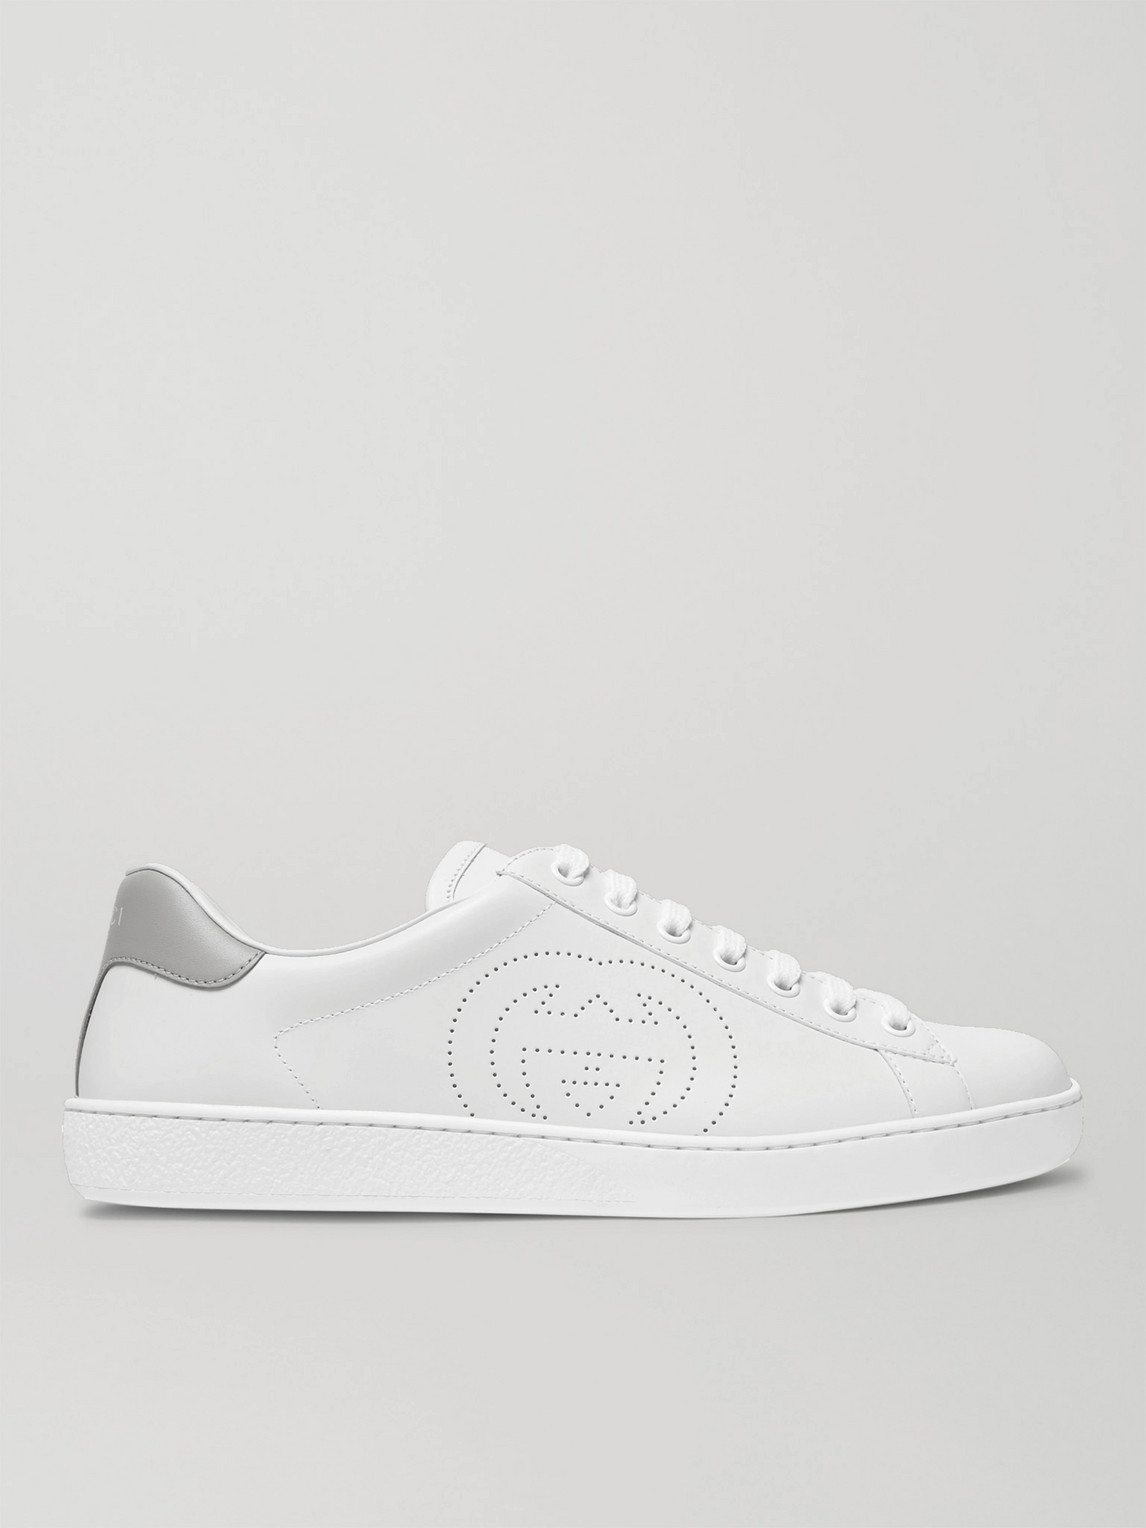 New Ace Perforated Leather Sneakers